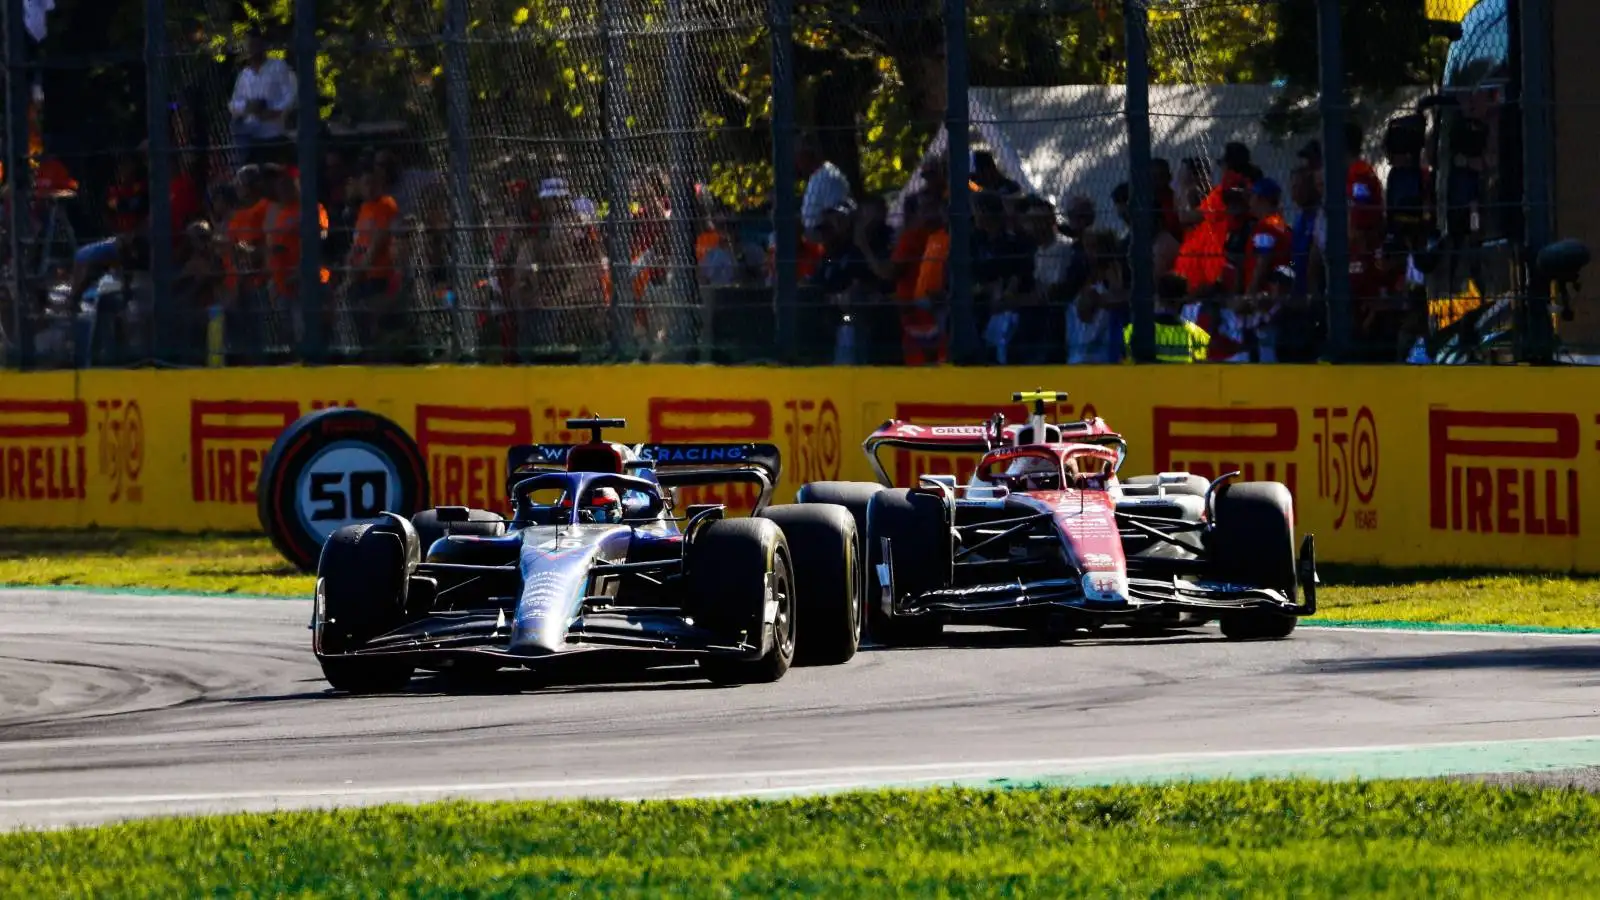 Zhou Guanyu, Alfa Romeo, looks for a way past Nyck de Vries, Williams. Italy, September 2022.